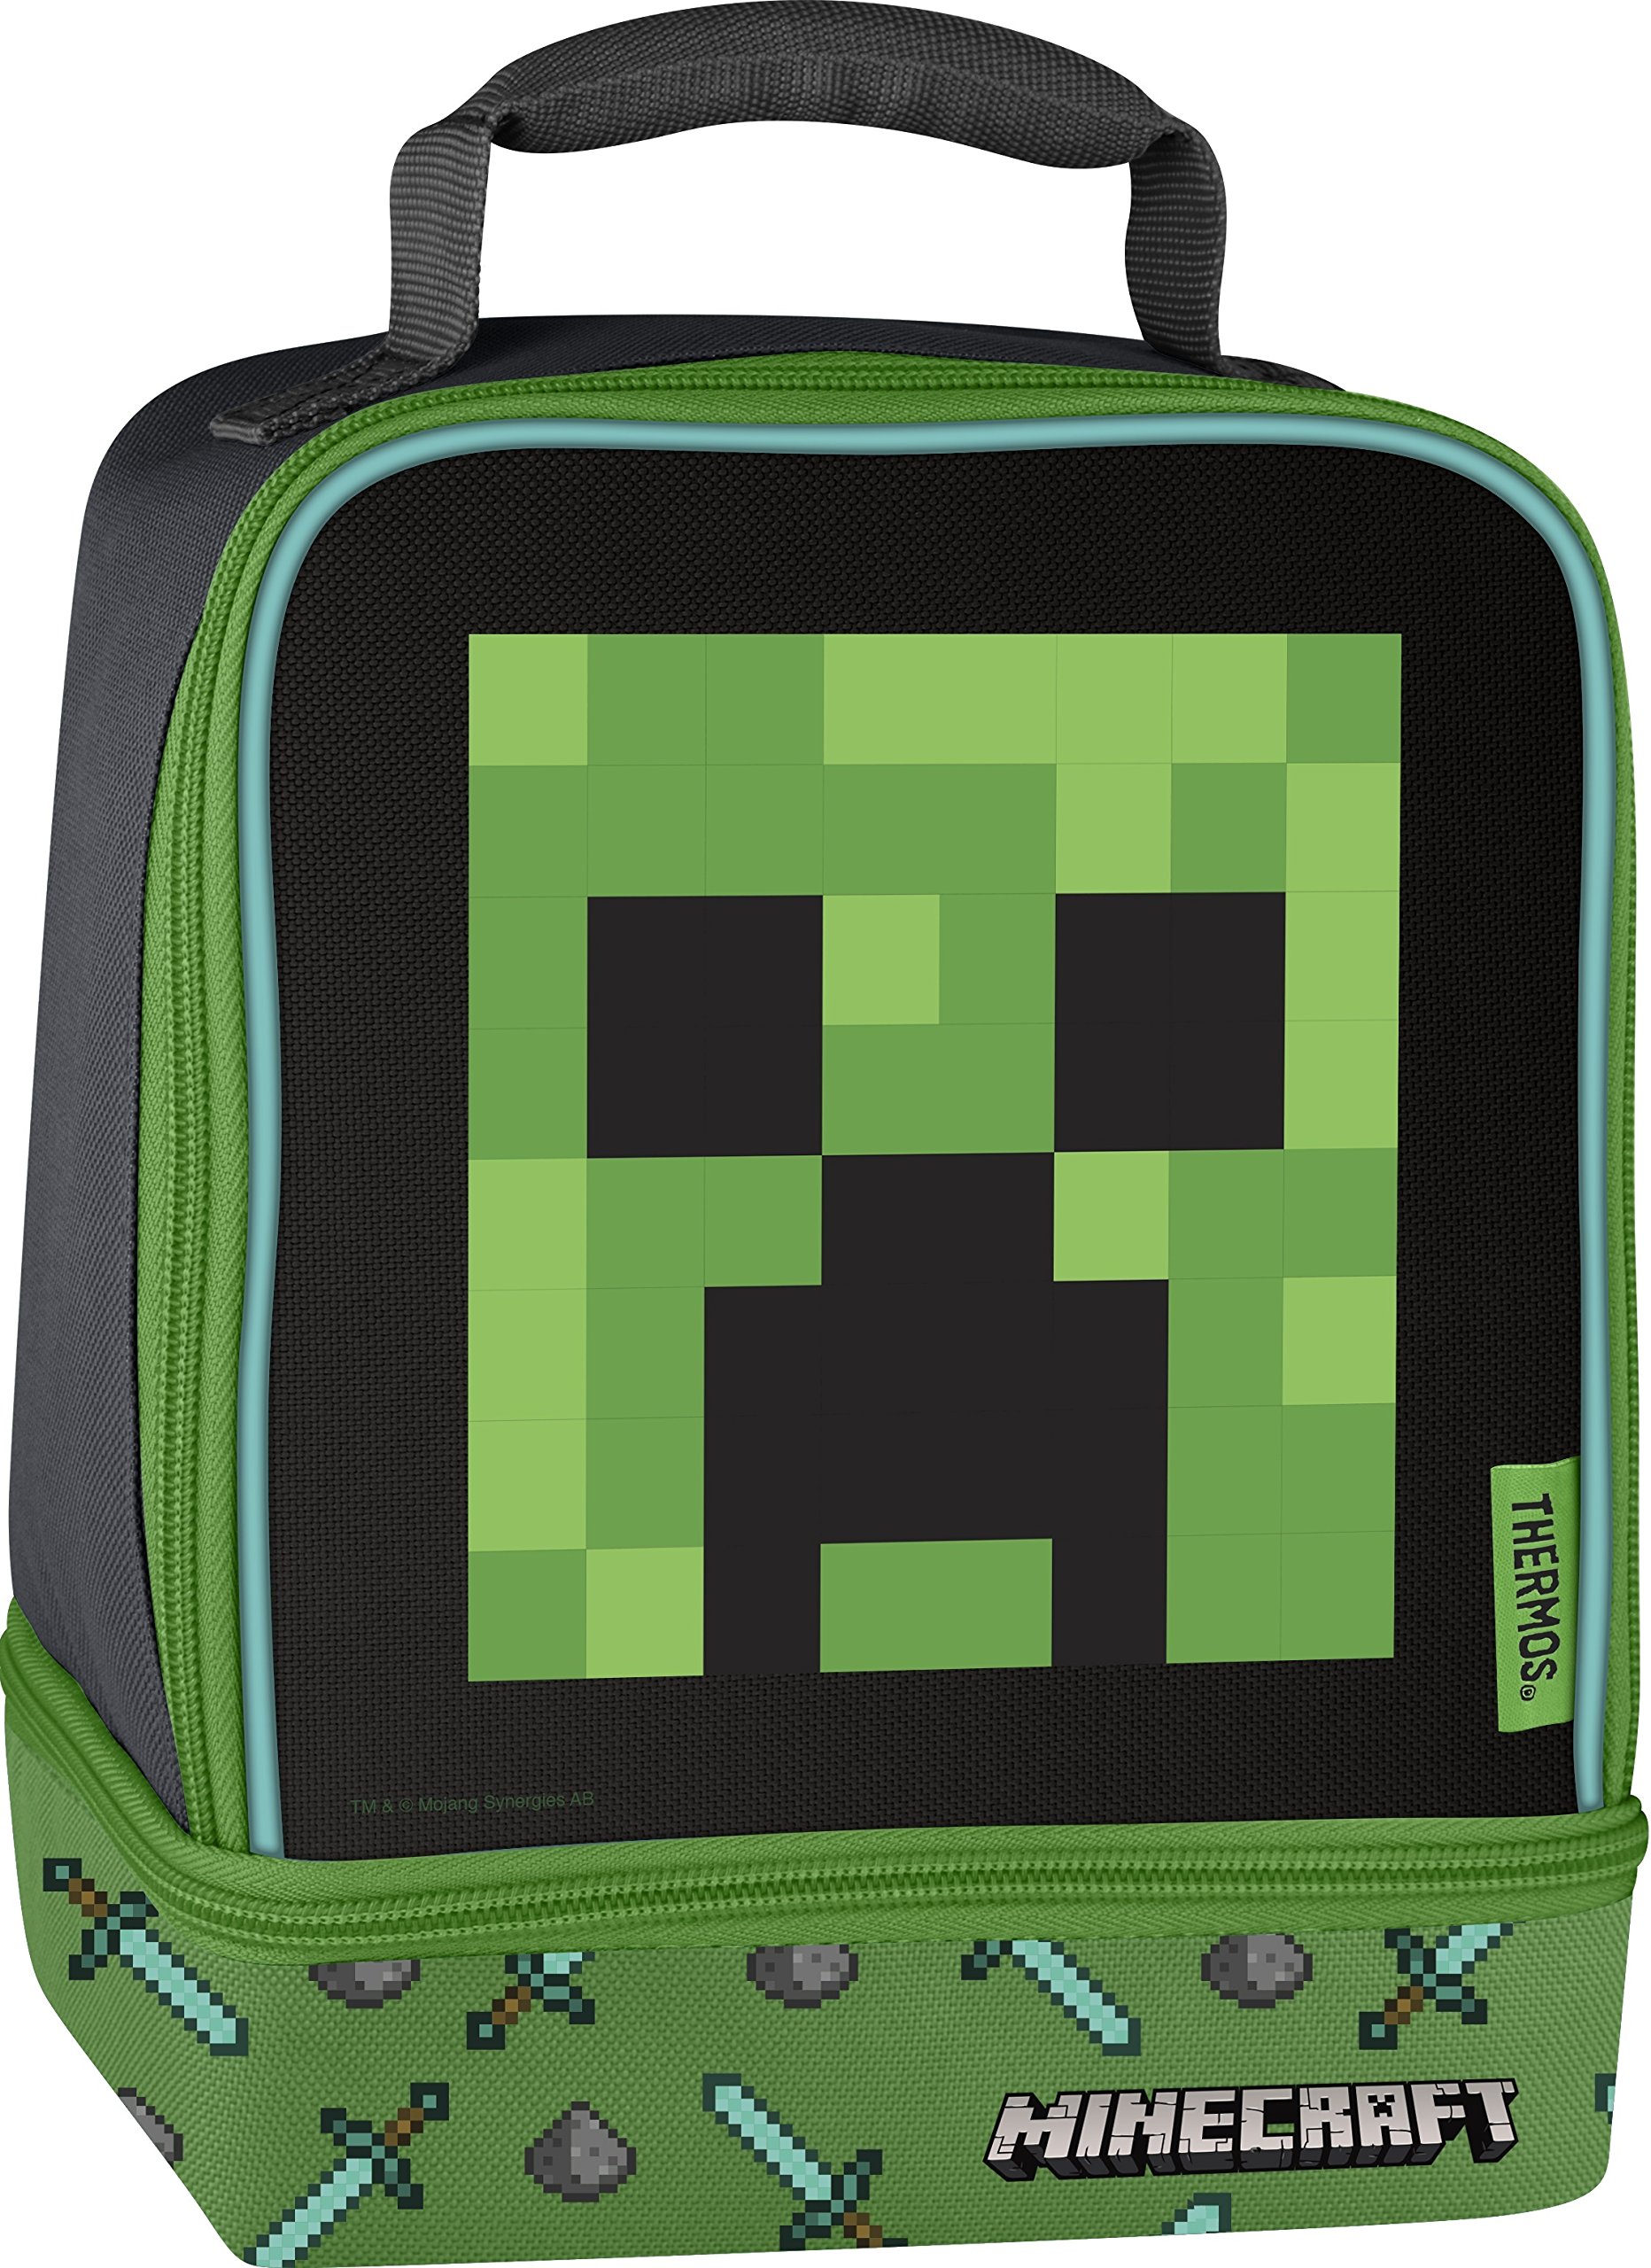 Book Cover Thermos Dual Lunch Kit, Minecraft - Creeper